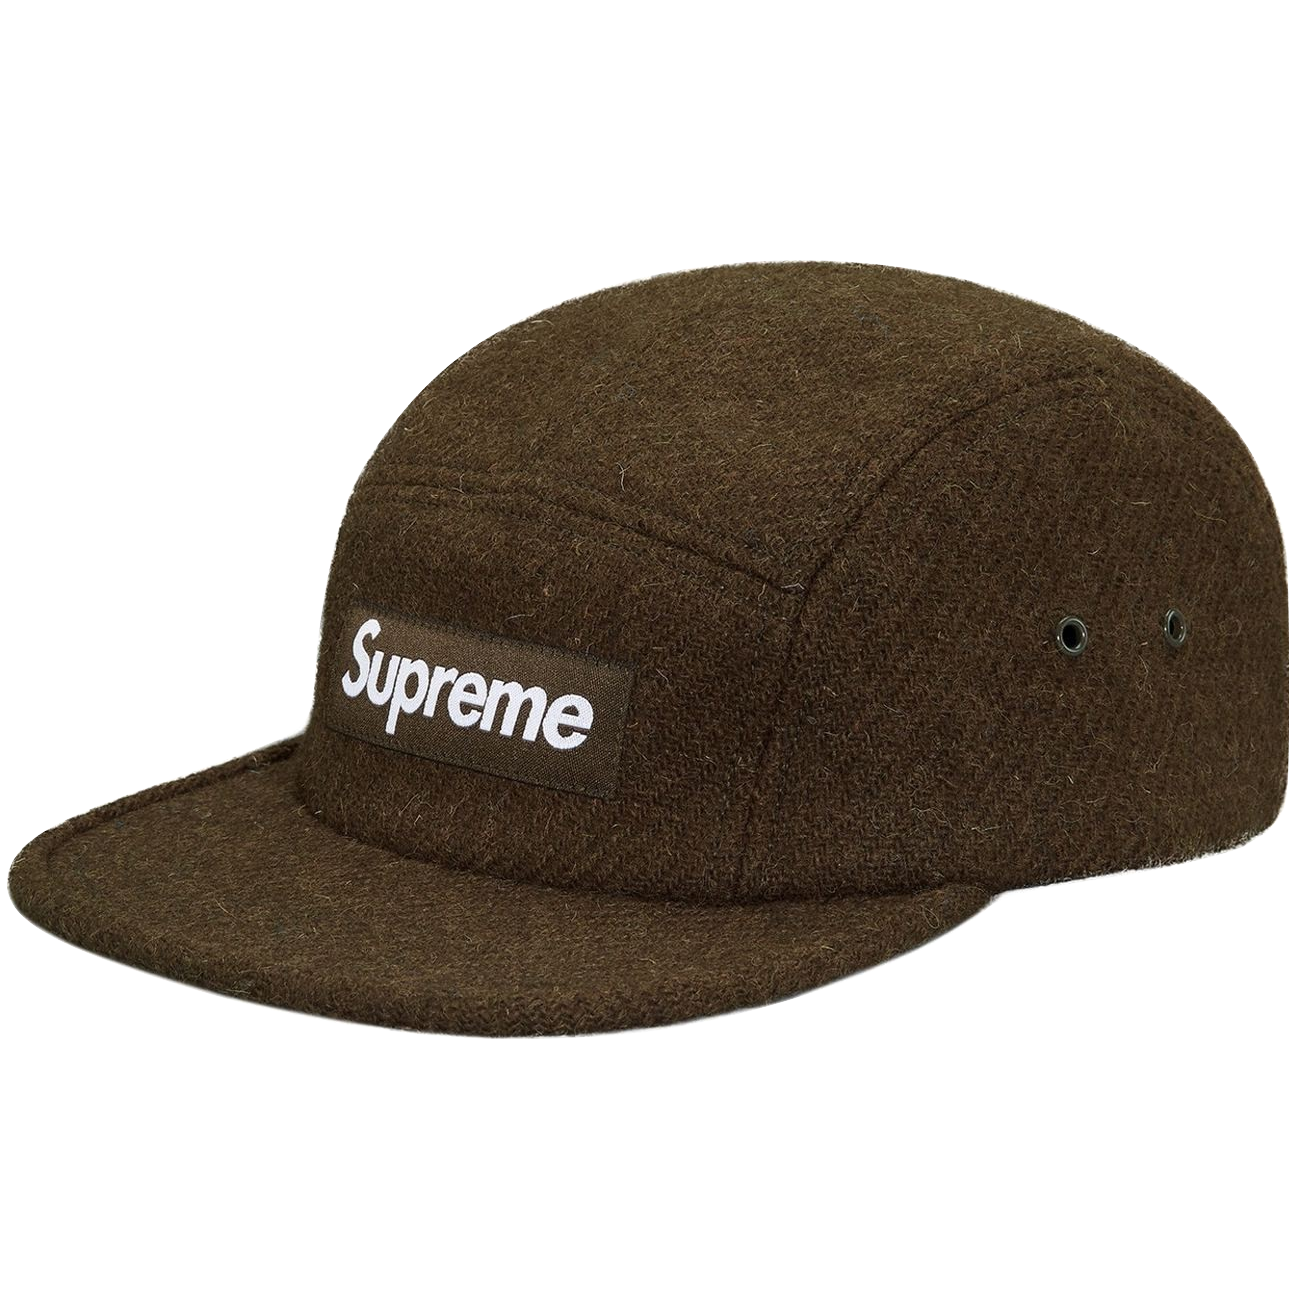 Supreme Featherweight Wool Camp Cap - Olive